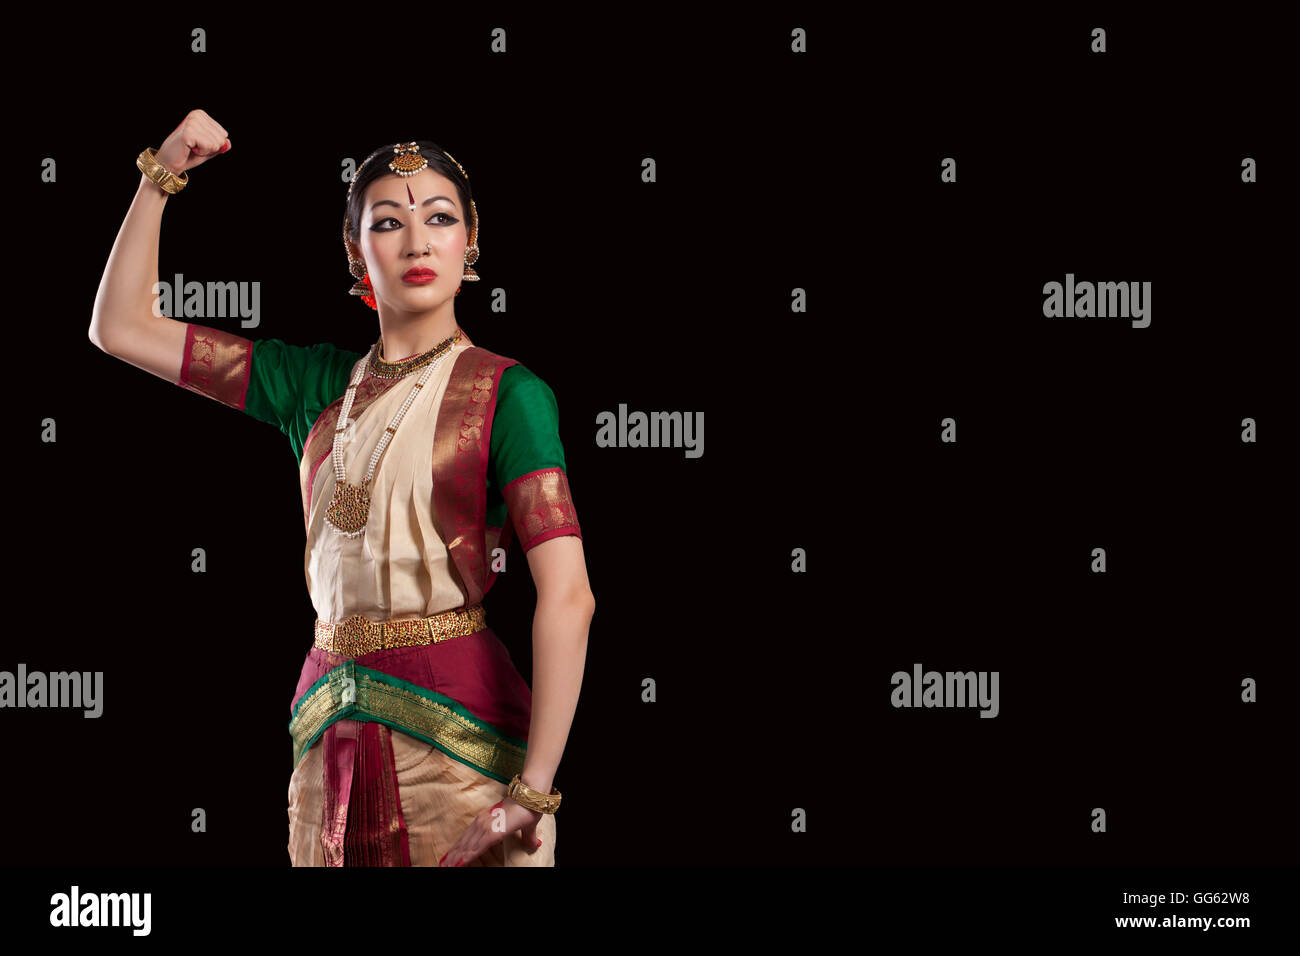 Young Bharatanatyam dancer flexing muscle over black background Stock Photo